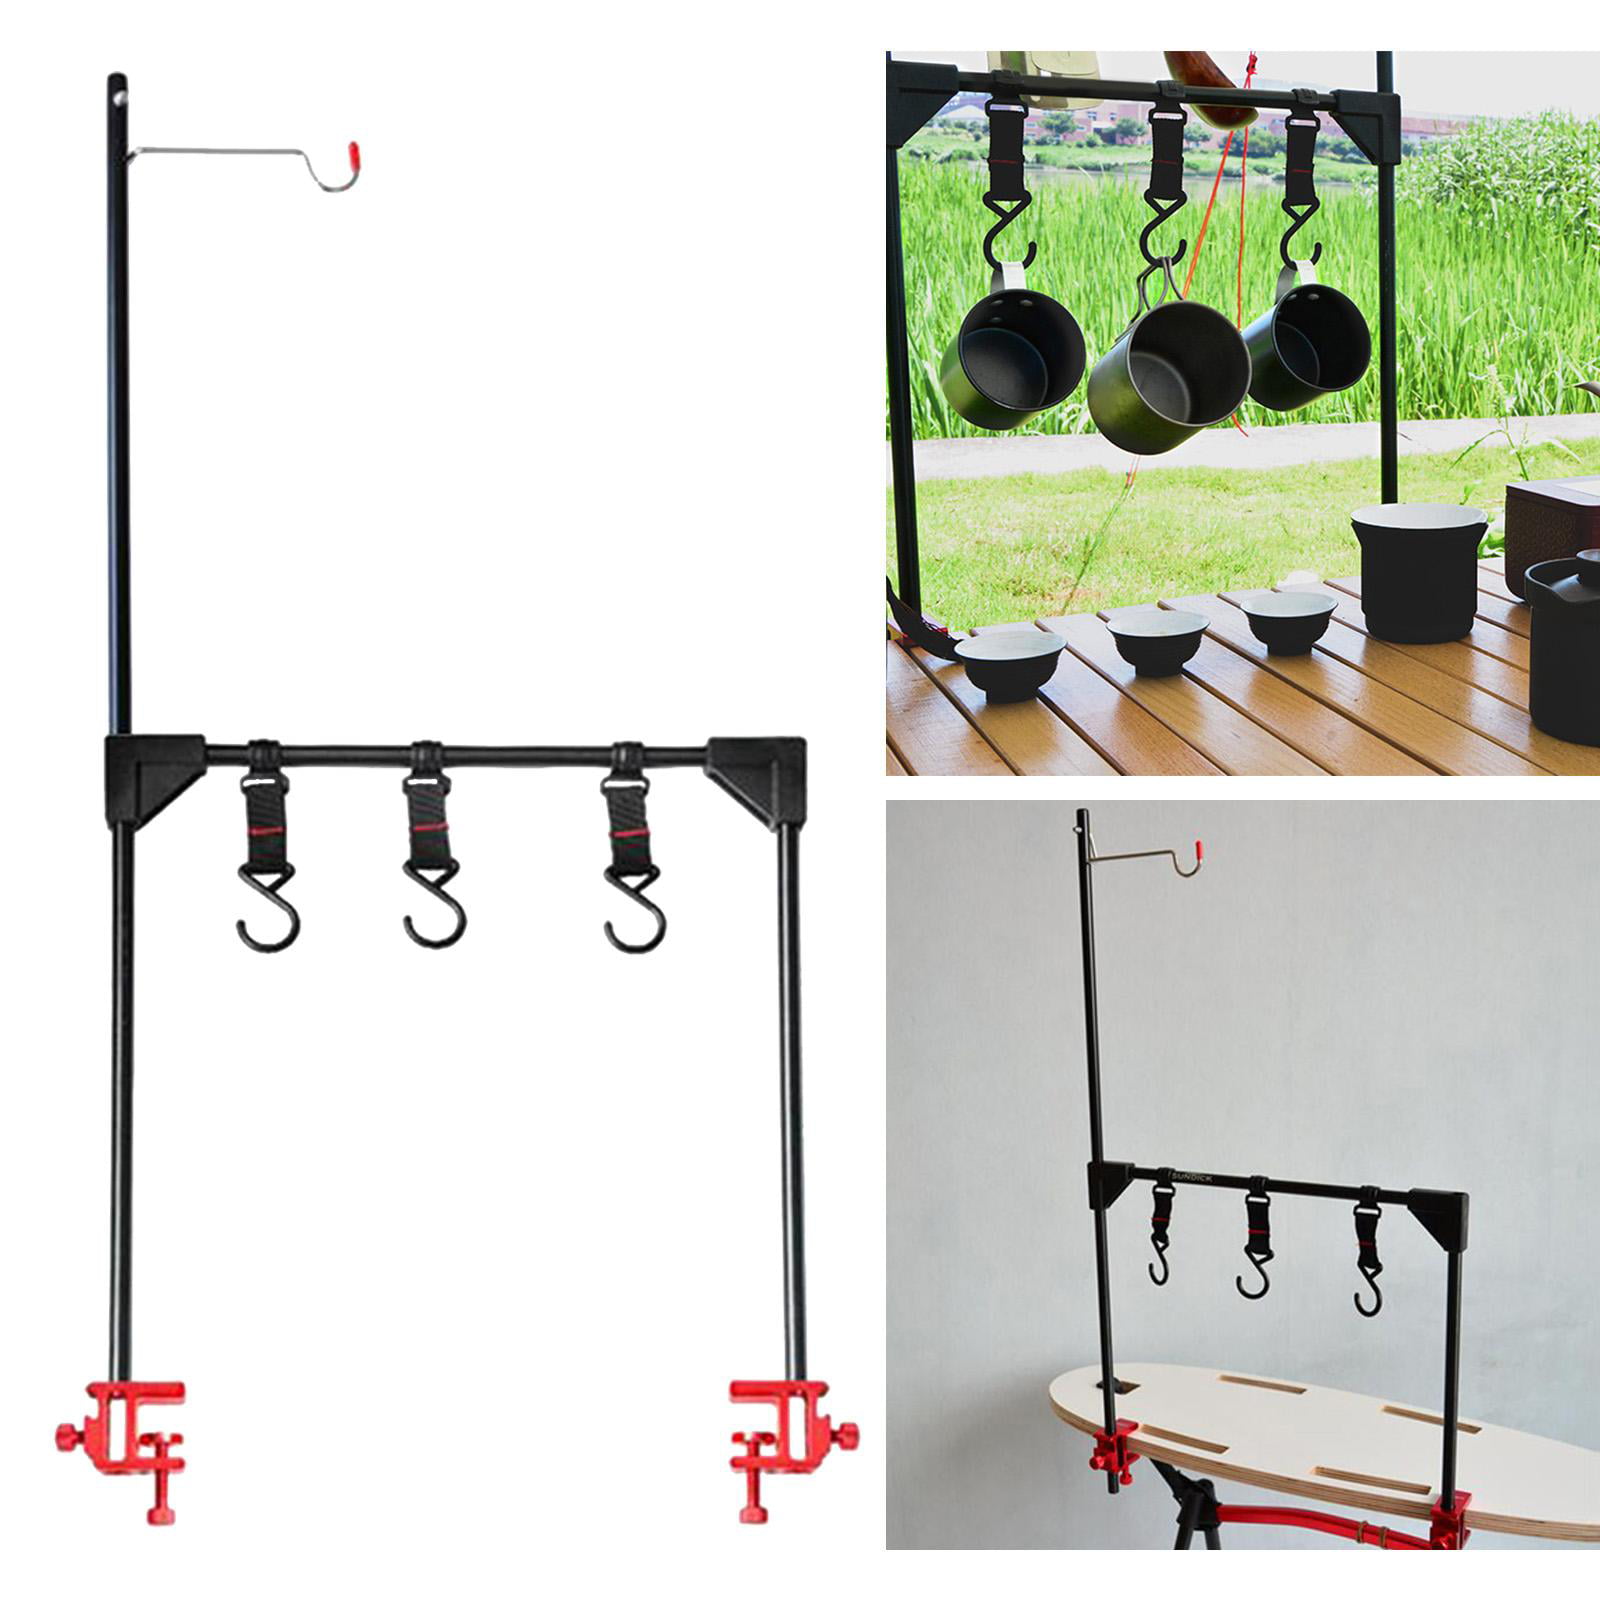 47.2 in. Tall White Outdoor Camping Lantern Tripod Stainless Steel Hanging  Pot Rack with Storage Bag